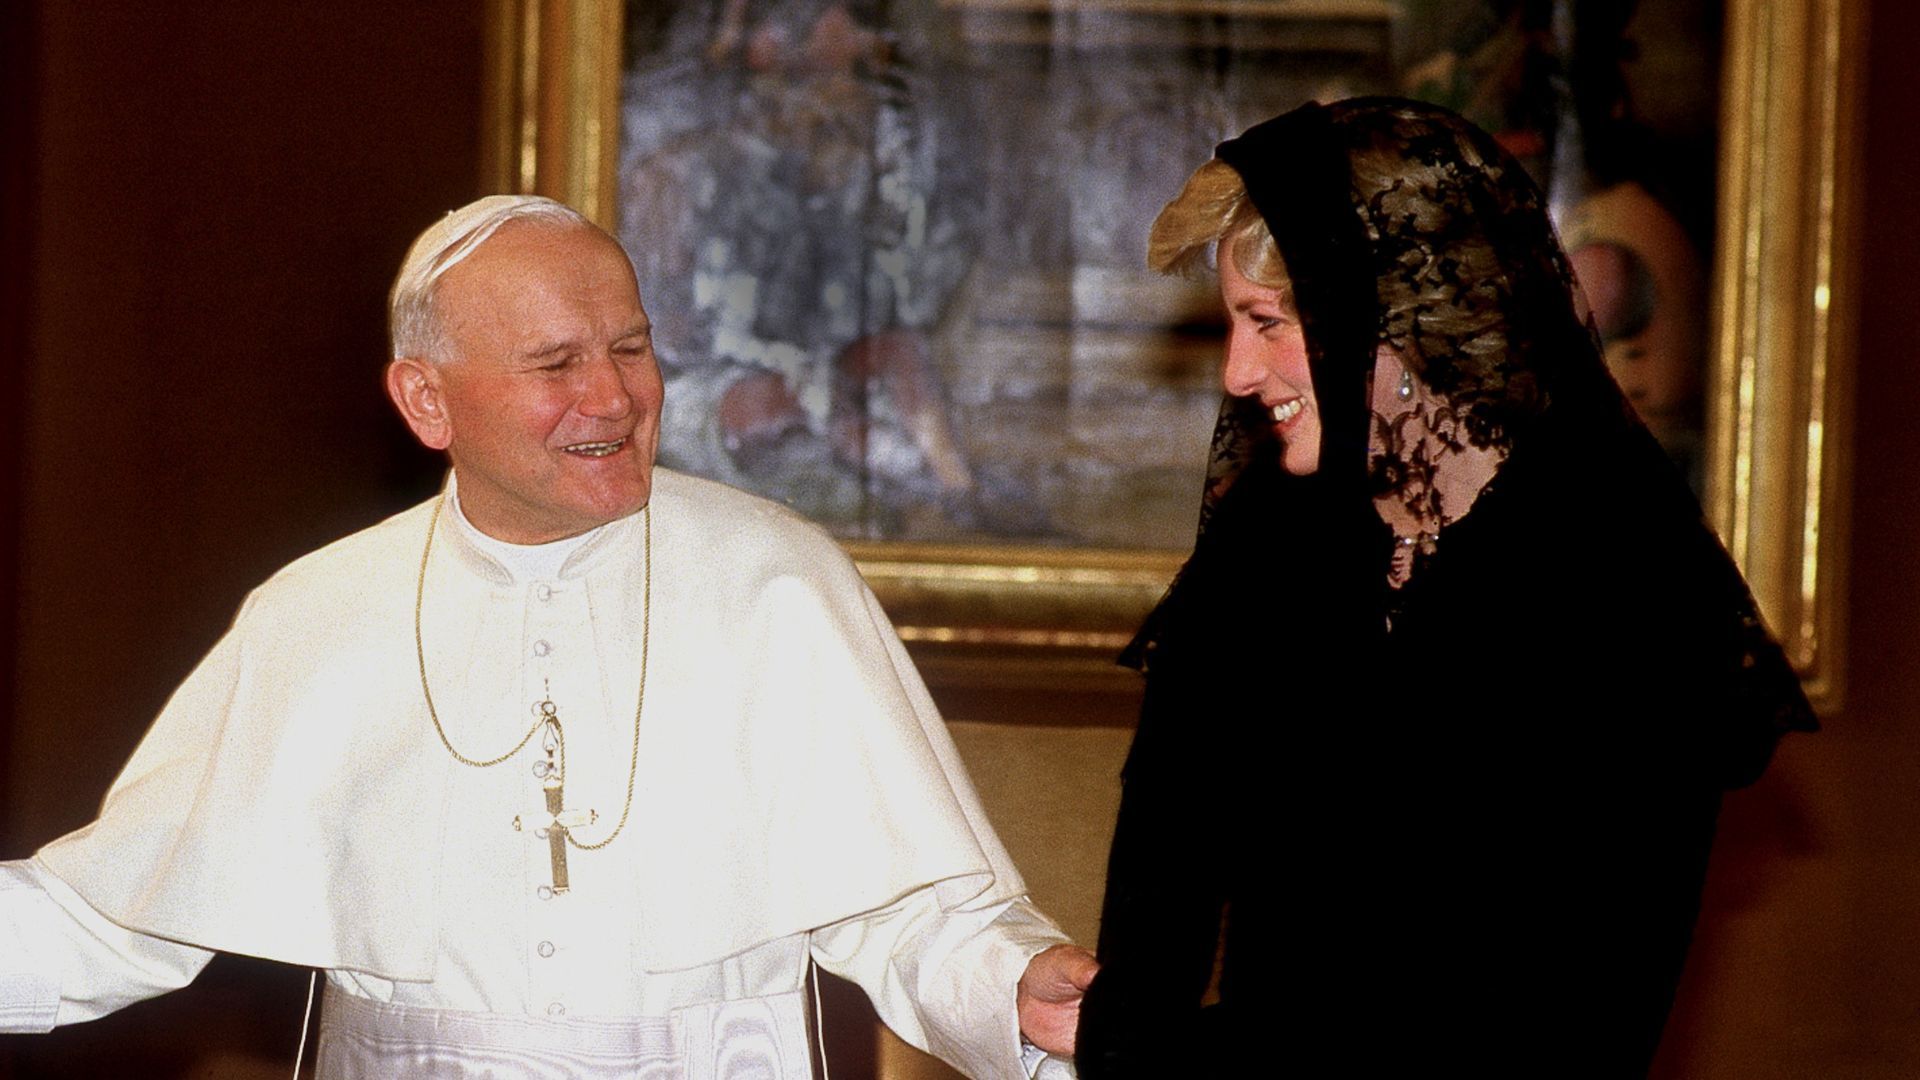 <p>                     Princess Diana met with Pope John Paul II at the Vatican in 1985 alongside Prince Charles. The princess wore a calf-length black lace dress by Catherine Walker and, in keeping with Vatican protocol, a black lace veil to cover her head. Enthralled by the impressive surroundings Diana and Charles returned later the same day to absorb the atmosphere and beauty of the Sistine Chapel. It’s reported that a request by the couple to attend a papal Mass was overruled by Buckingham Palace.                   </p>